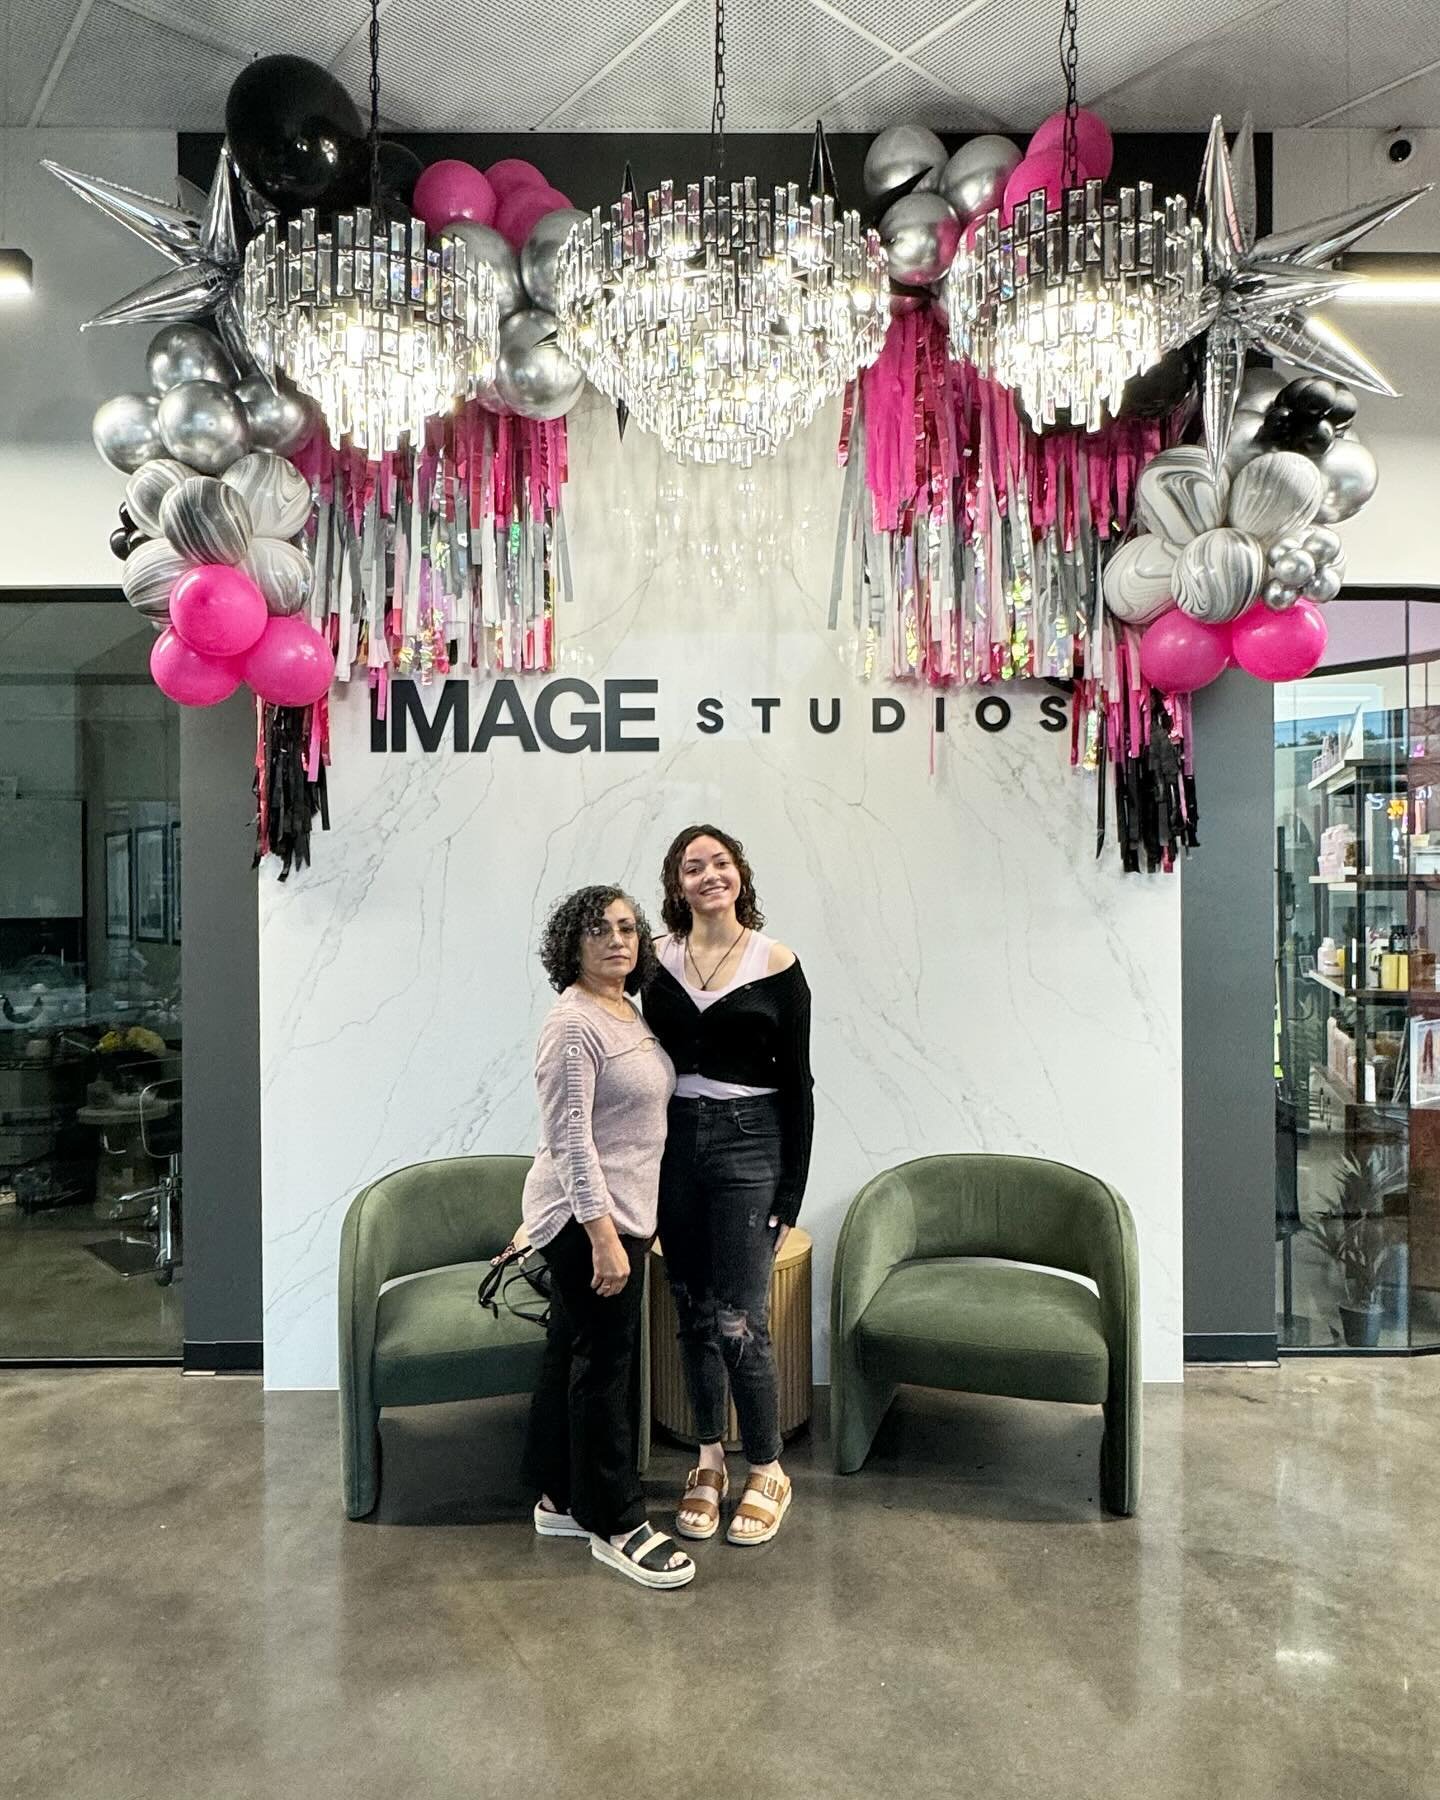 A fabulous grand opening event @imagestudiosdallas 💞

Thank you Jana and Mina for having us as your balloon decor and face painting artists for the grand opening of Image Studios Dallas. 

It&rsquo;s an honor to be able to celebrate with other women